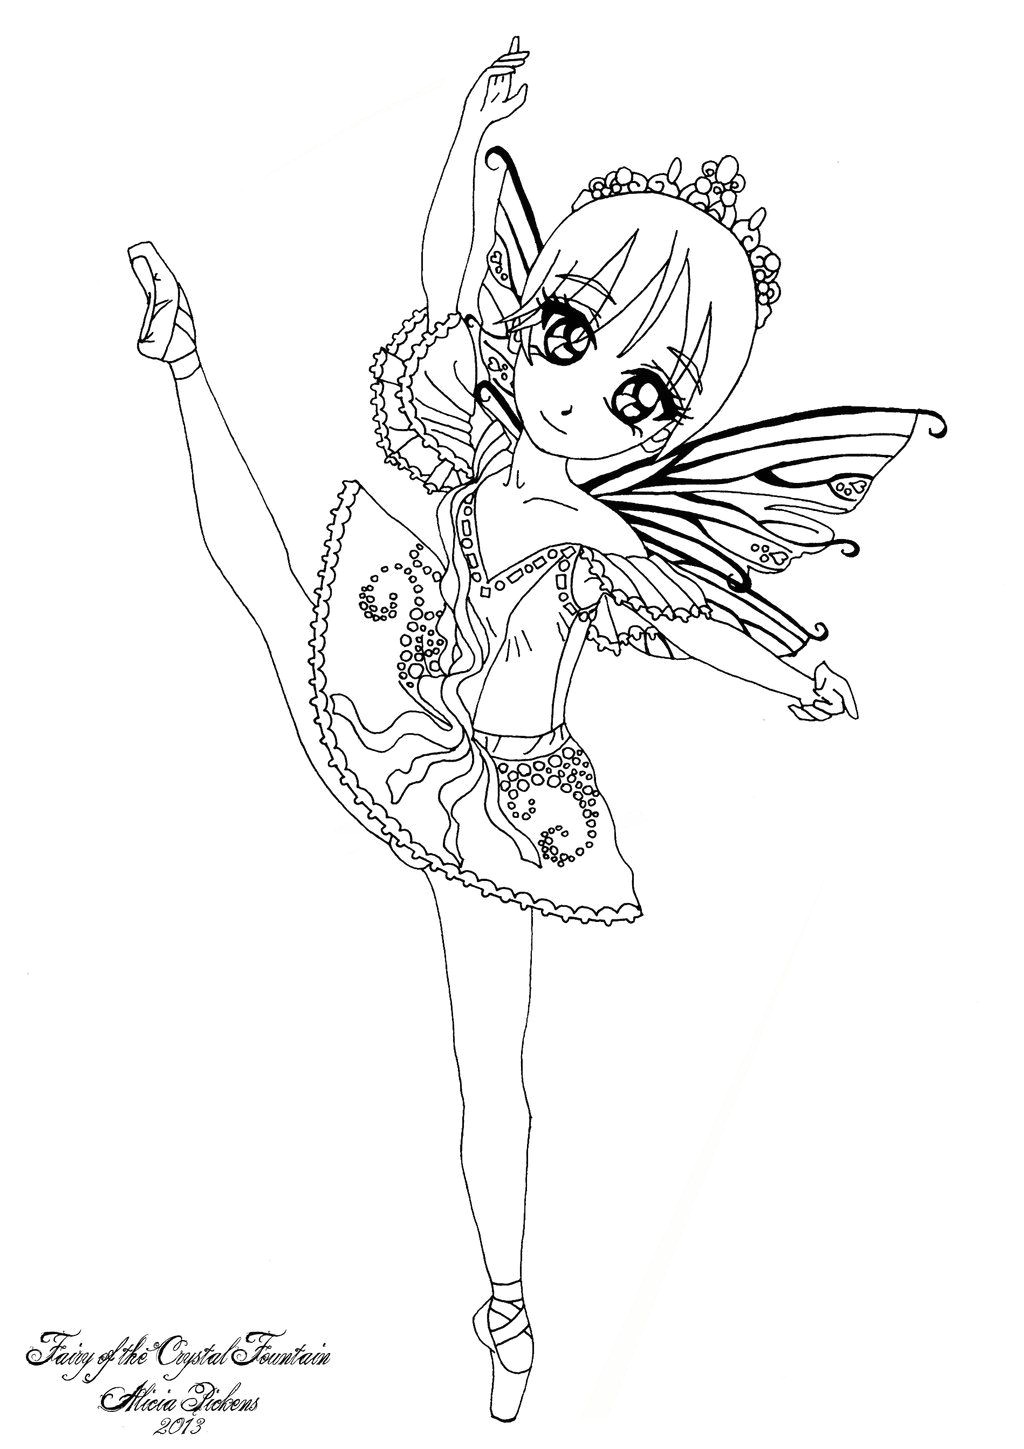 I decided to draw all six fairies from the ballet "Sleeping Beauty" as cute chibis Feel free to color this however you like please just leave my signa